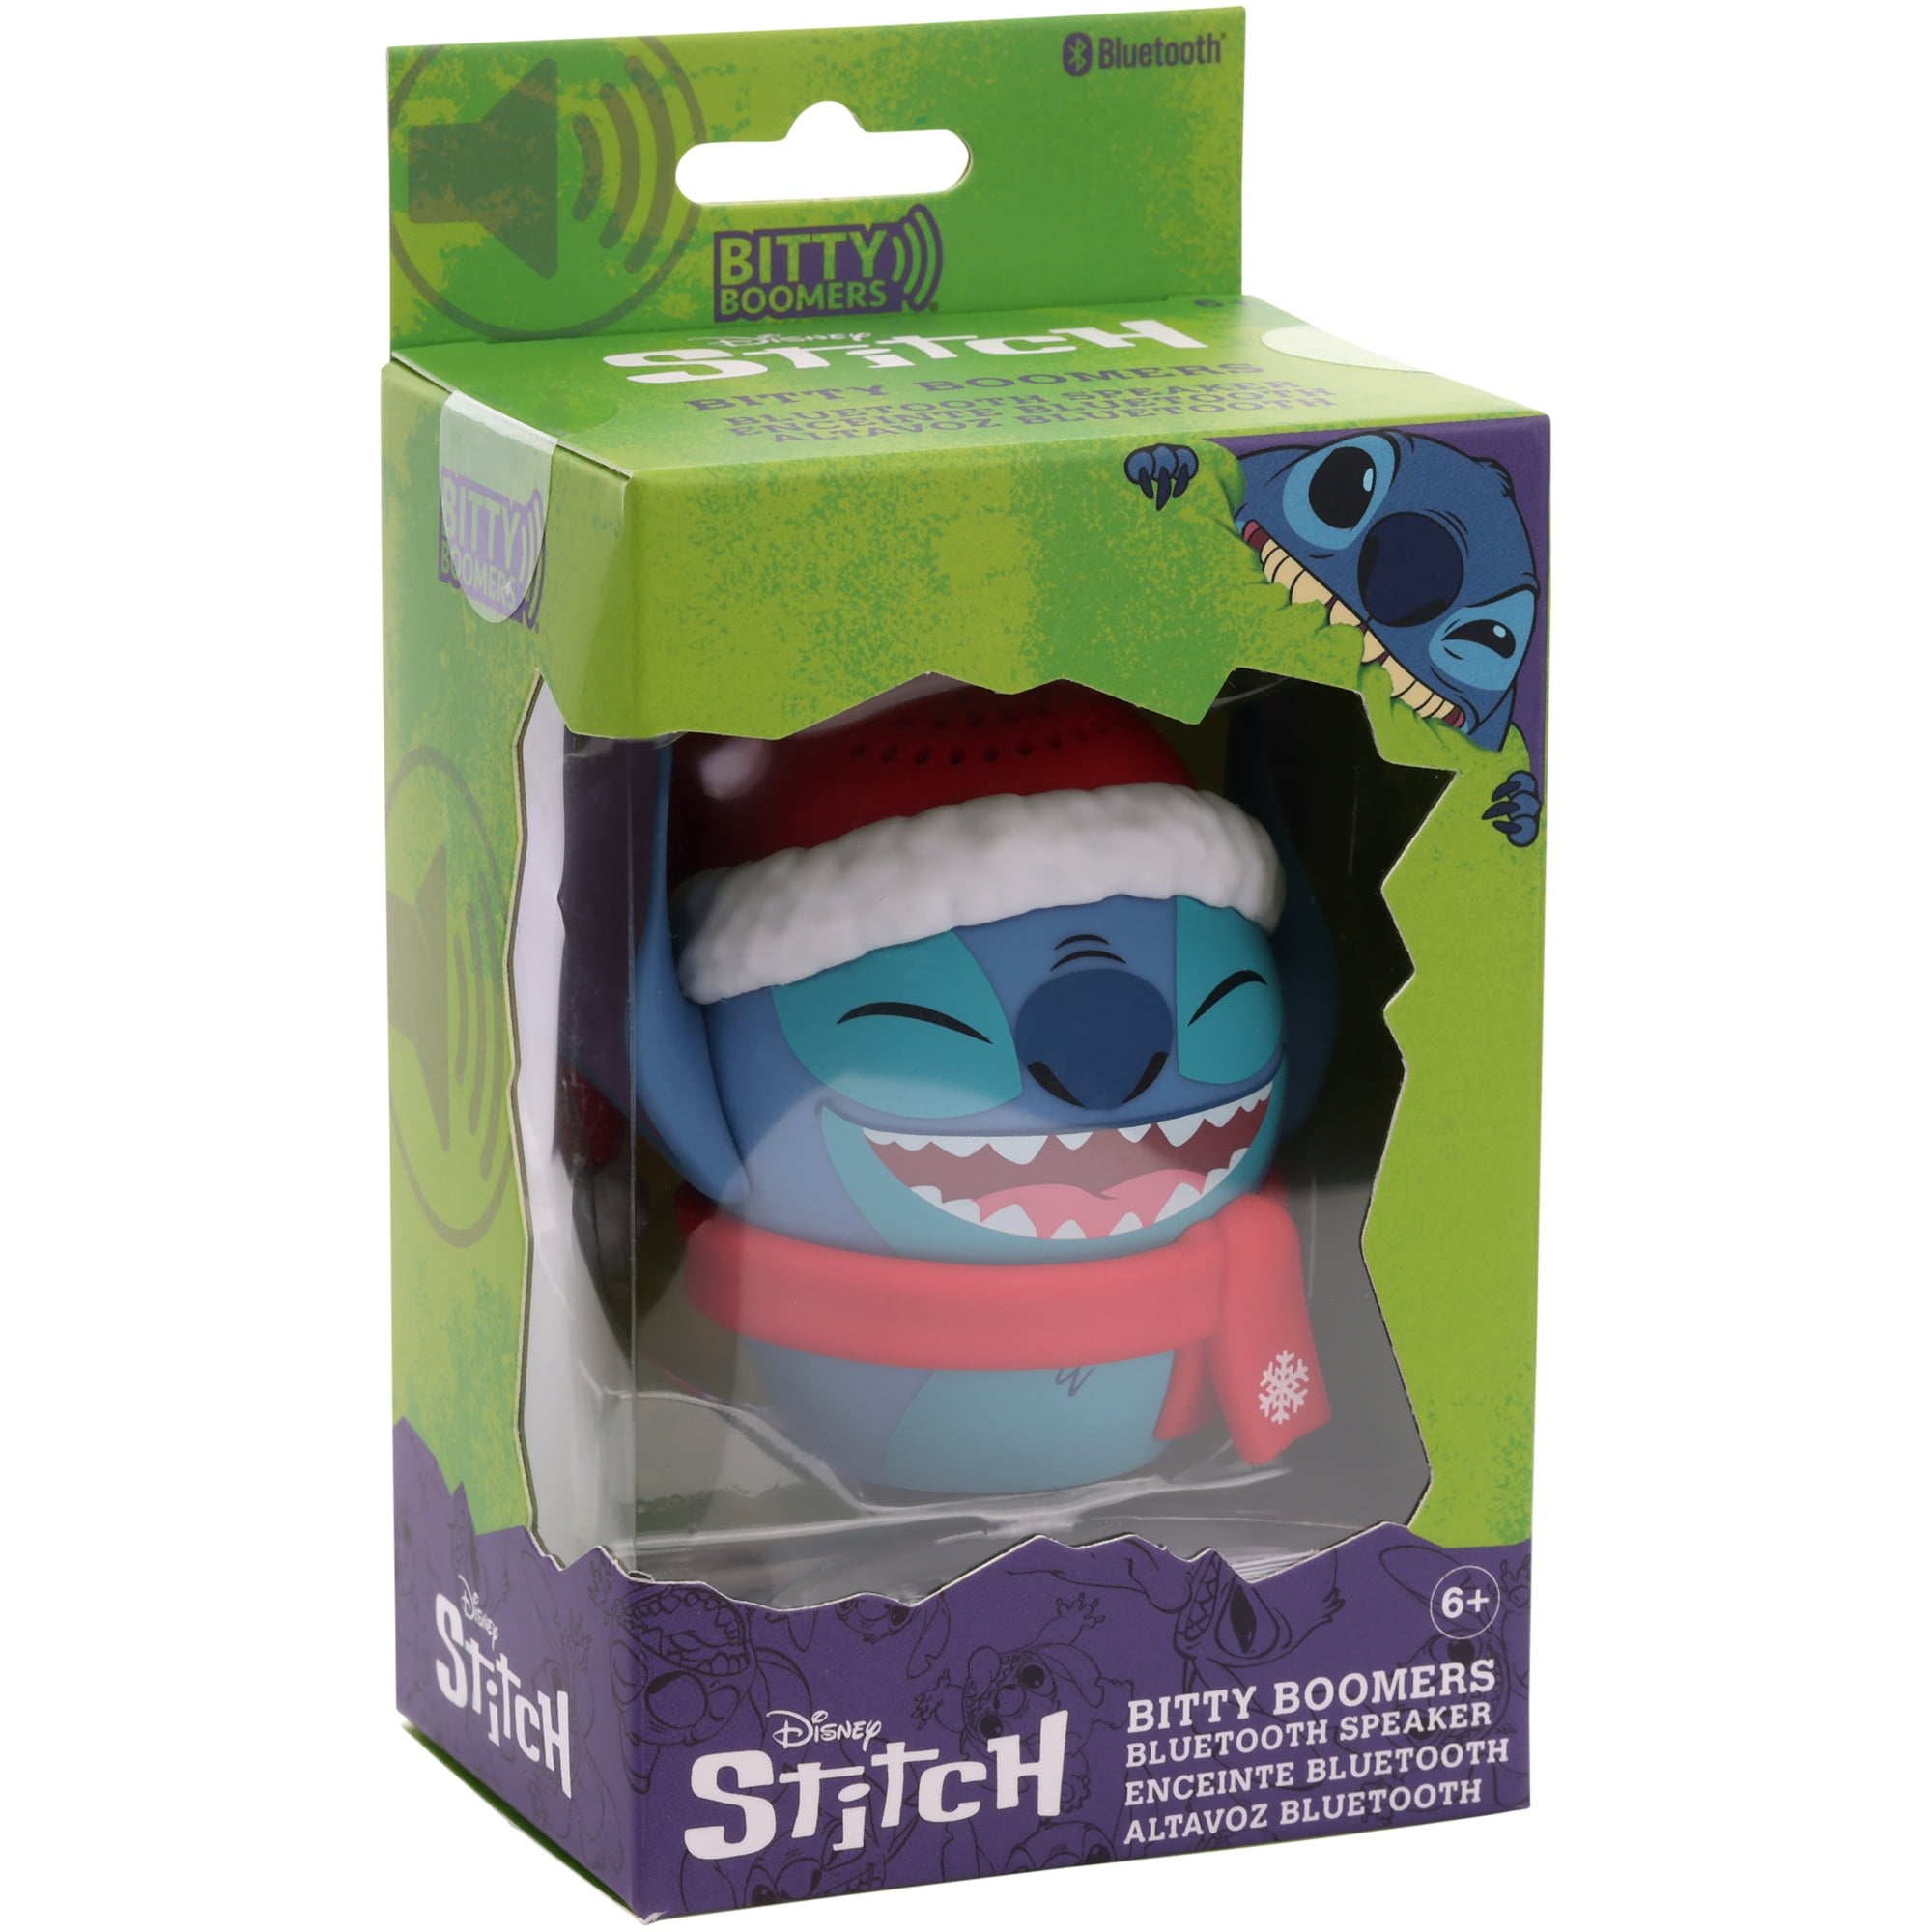 Bitty Boomers Disney Stitch with Sunglasses Bluetooth Speaker, Multicolor 